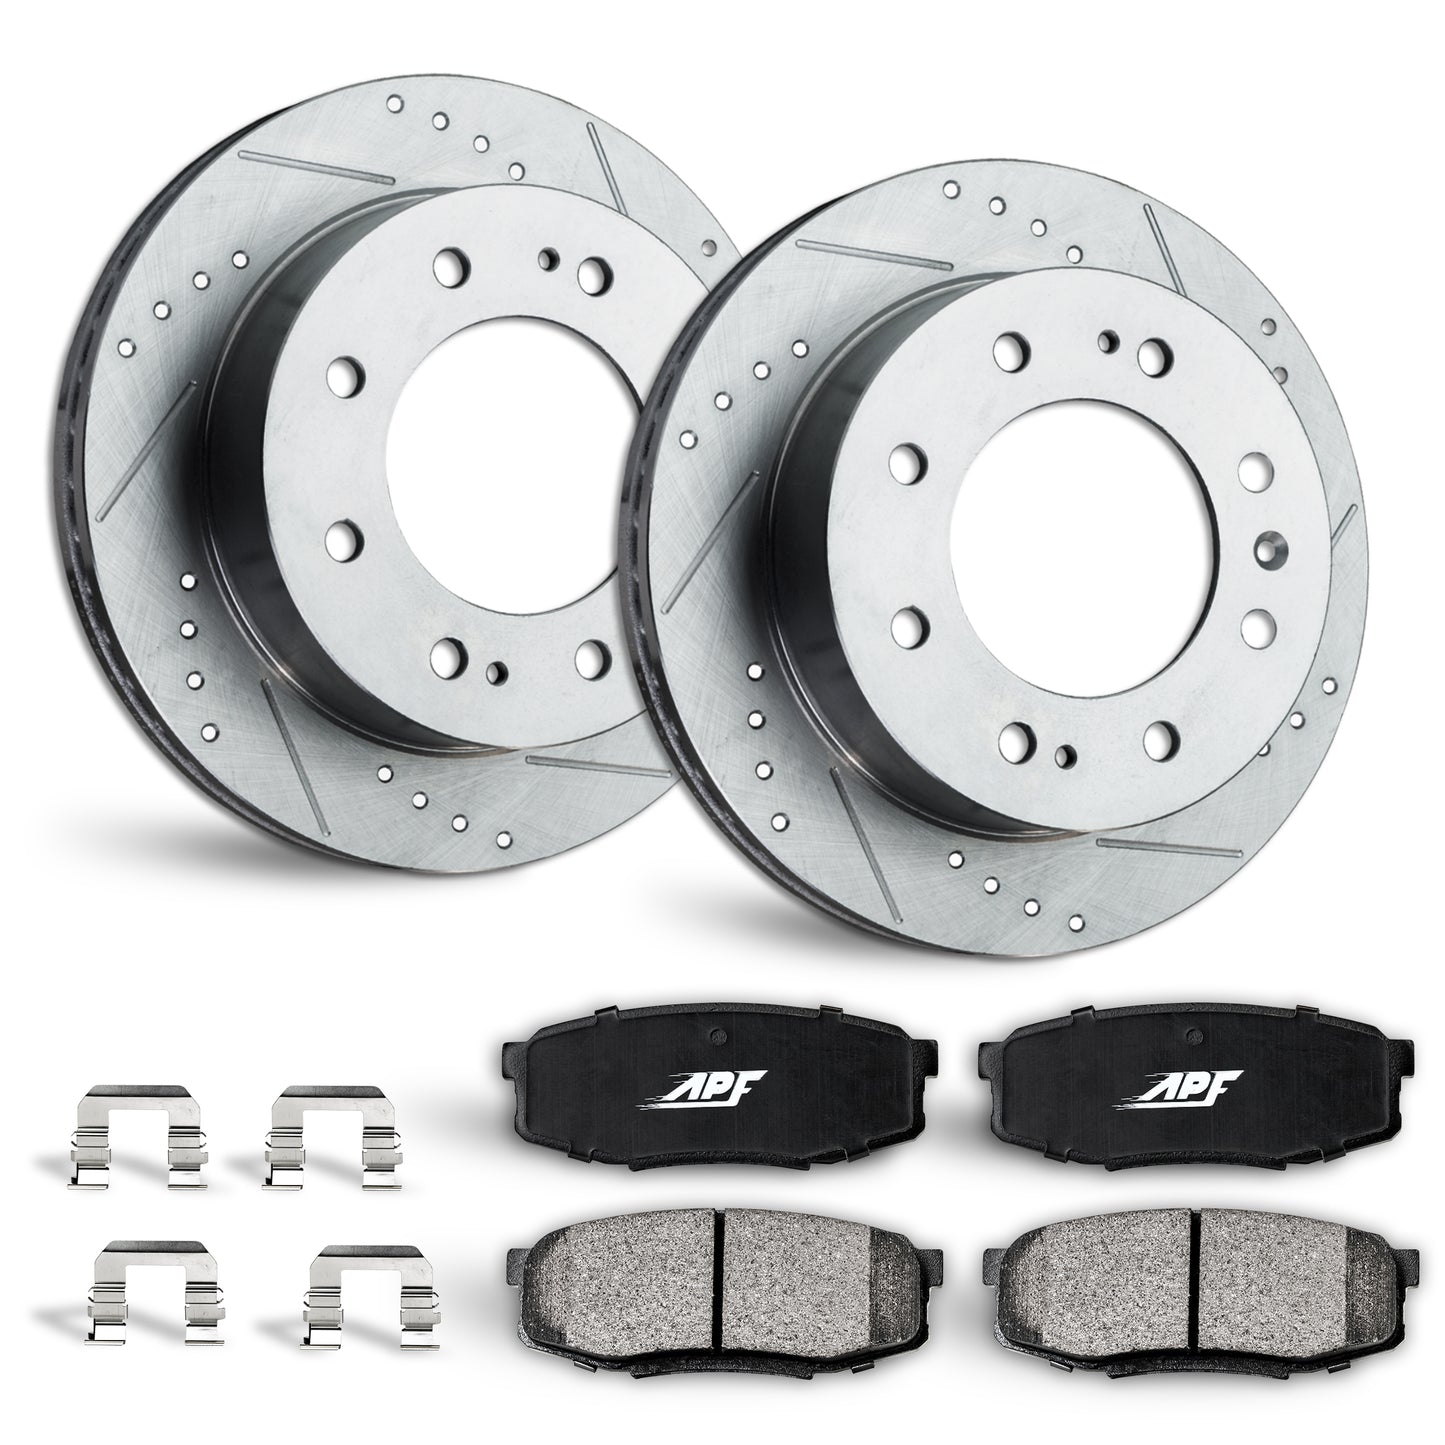 APF Rear Brake Kit compatible with Chevrolet Silverado 2500 HD 8 Lug 2007 | Zinc Drilled Slotted Rotors with Ceramic Carbon Fiber Brake Pads